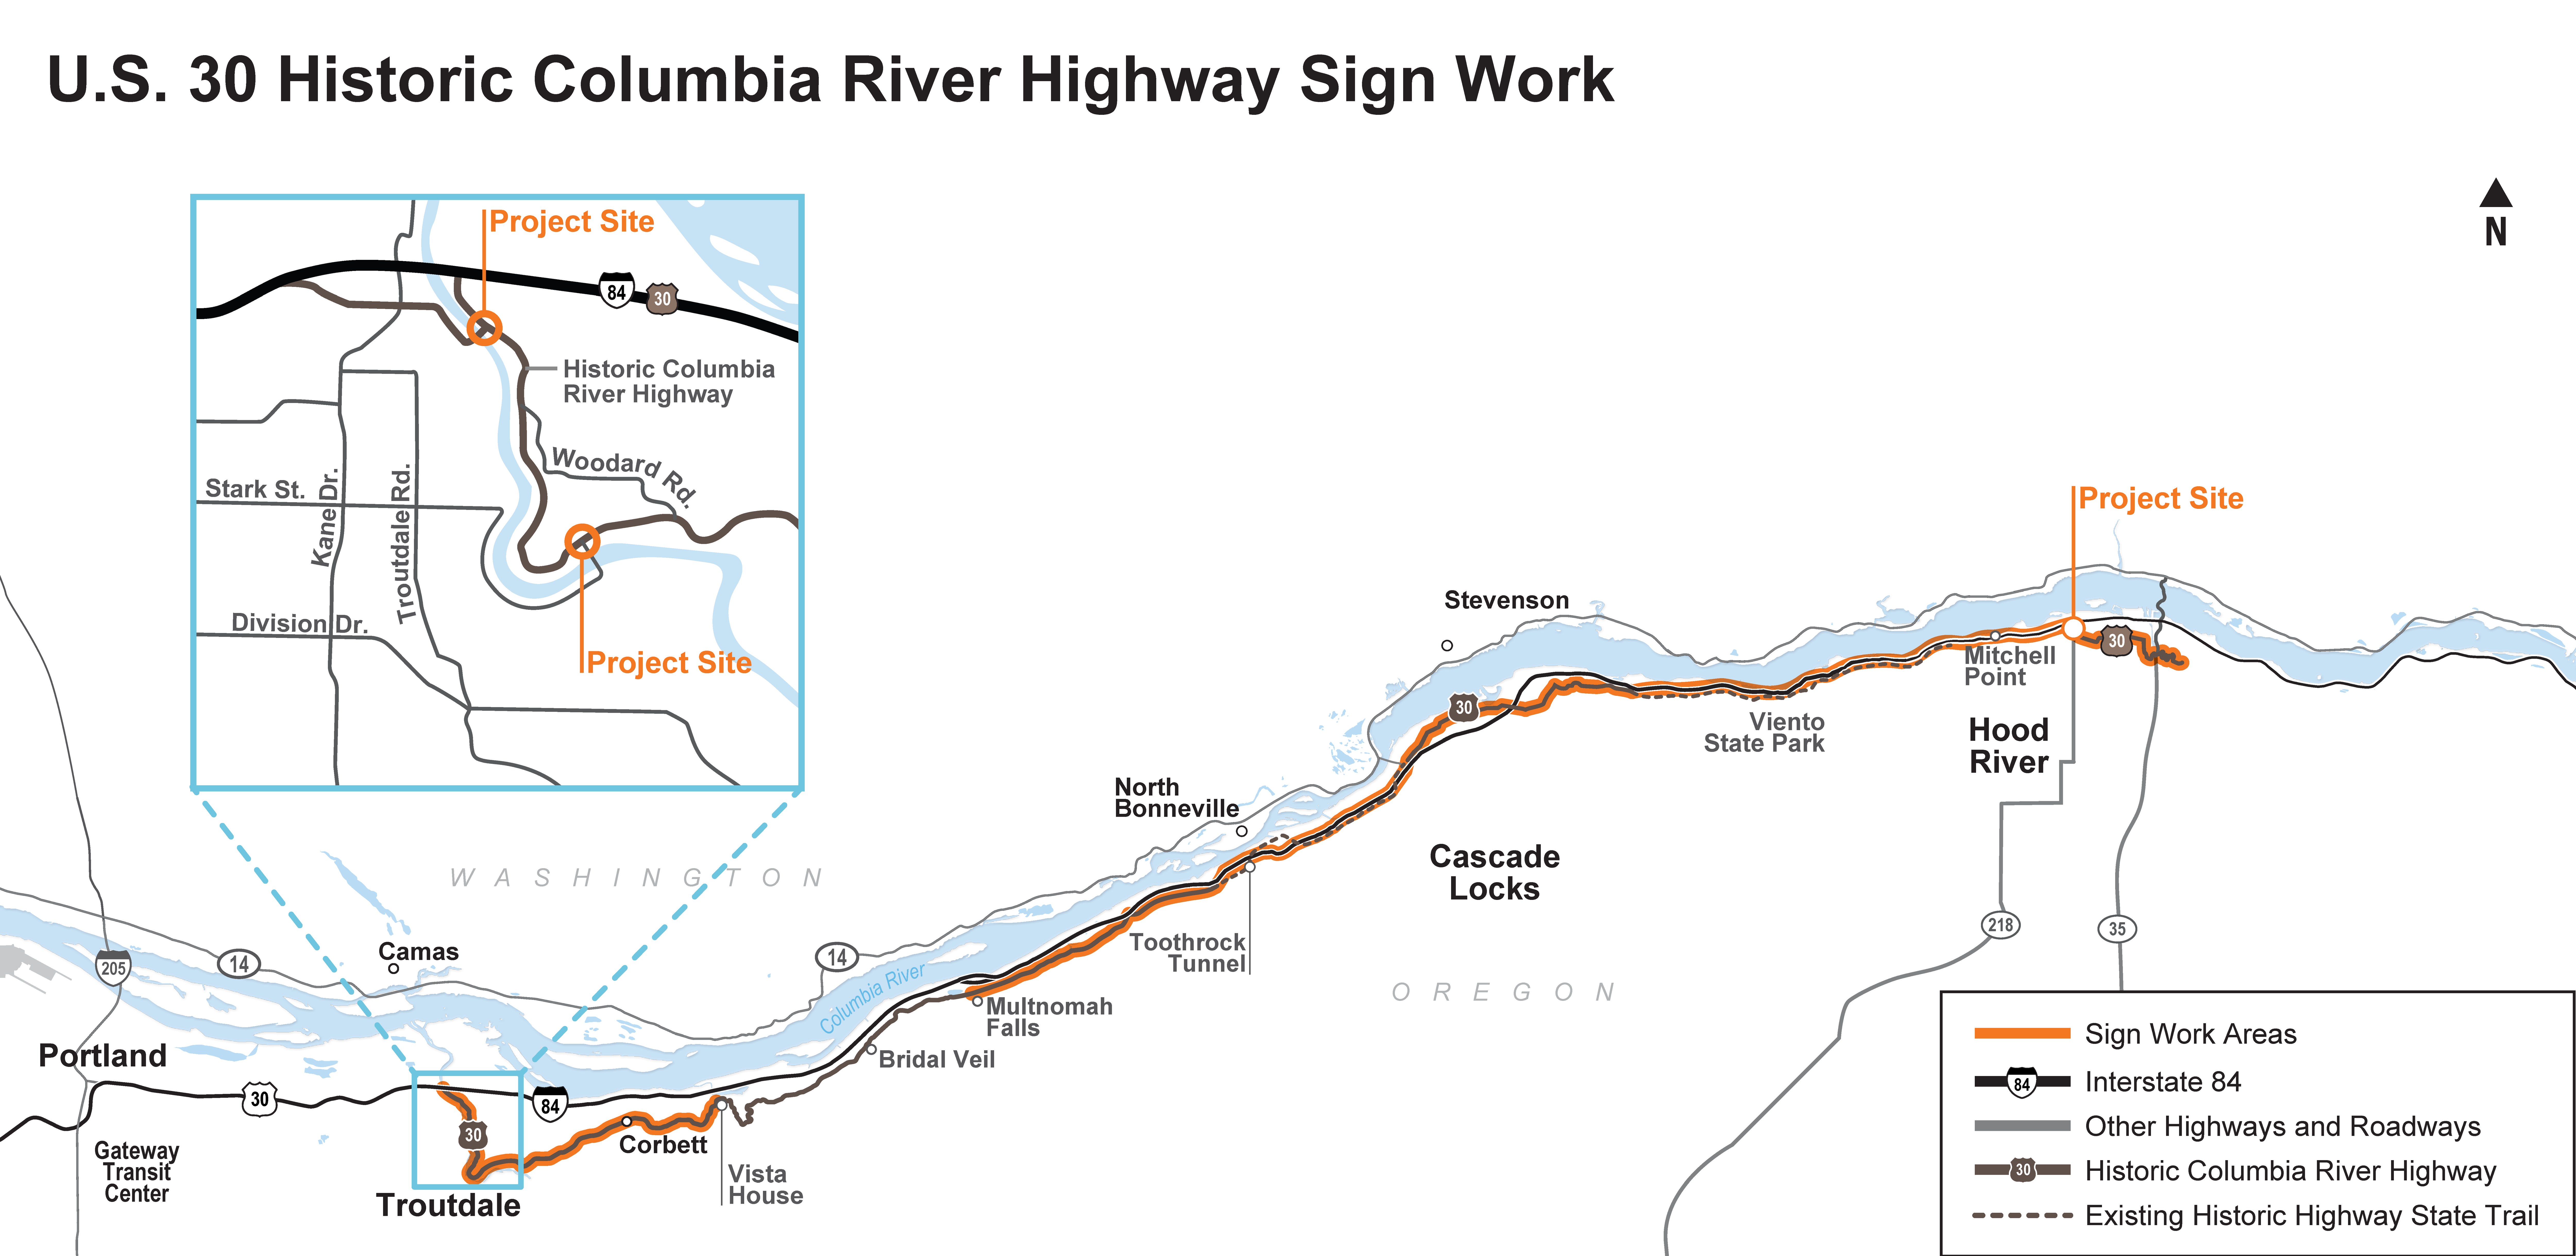 Overview of the sign upgrade sites between Troutdale and Hood River.